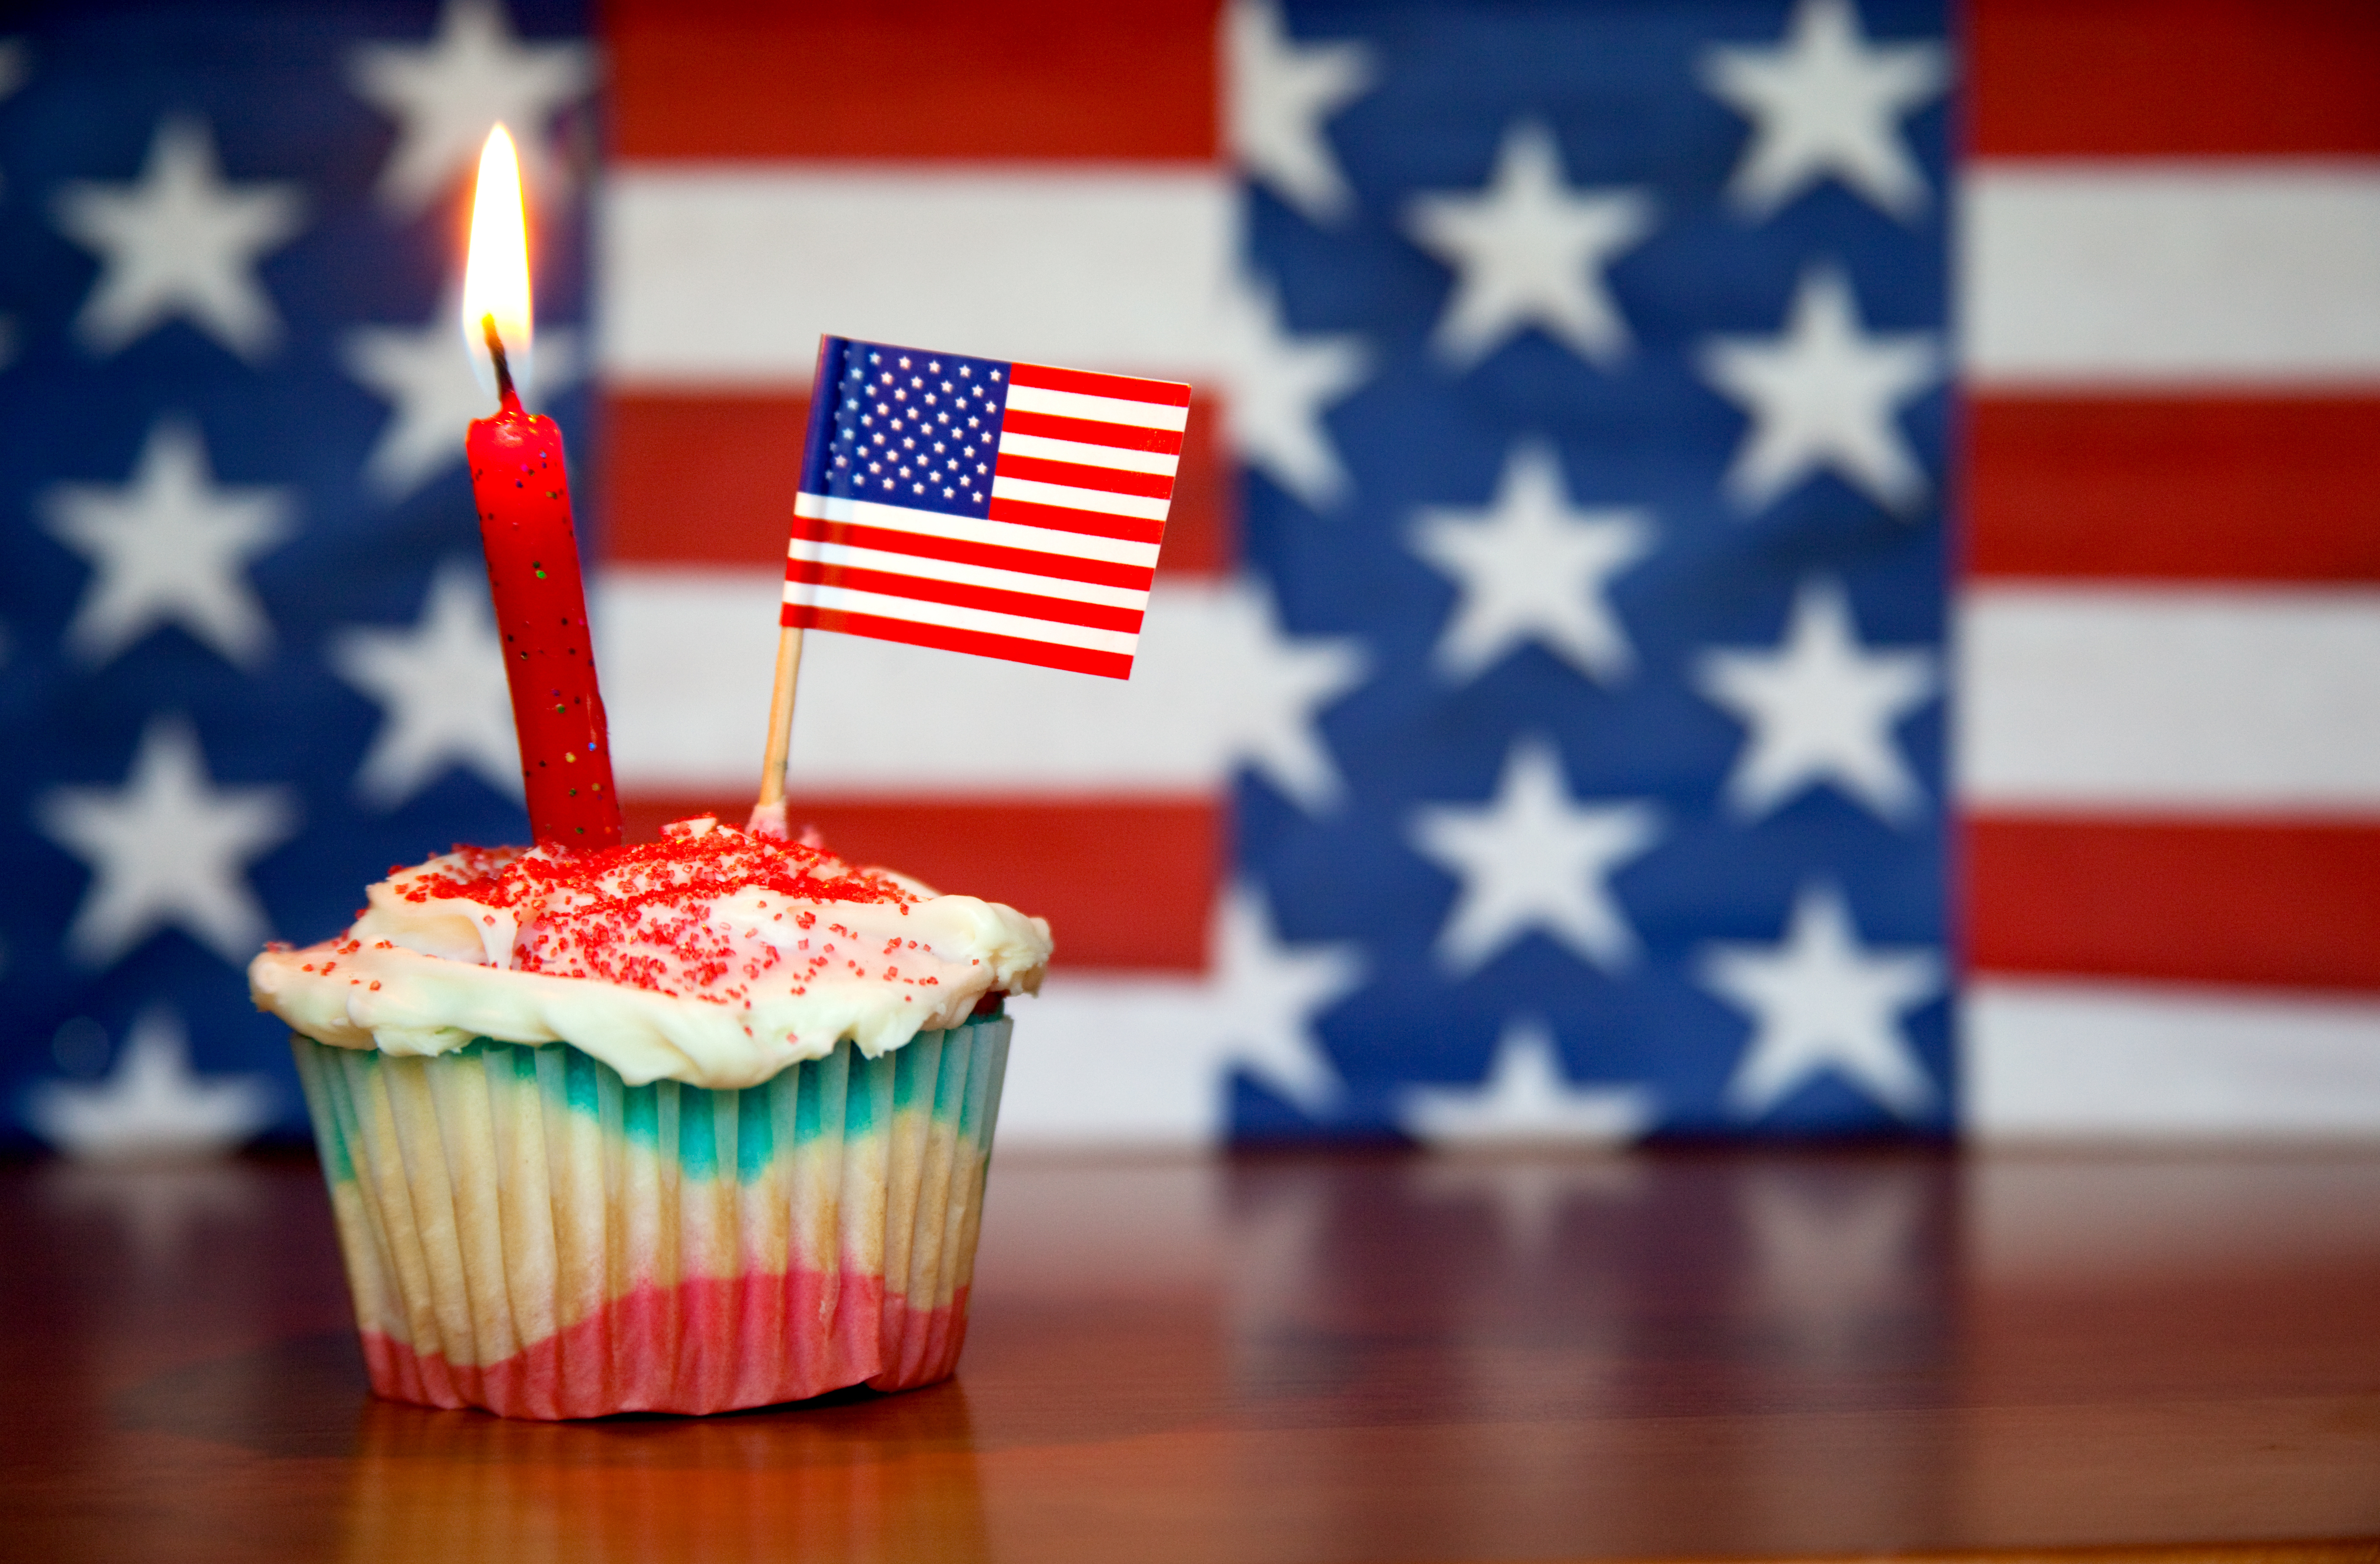 Tips For Throwing a Red, White and Blue Kids Birthday Party